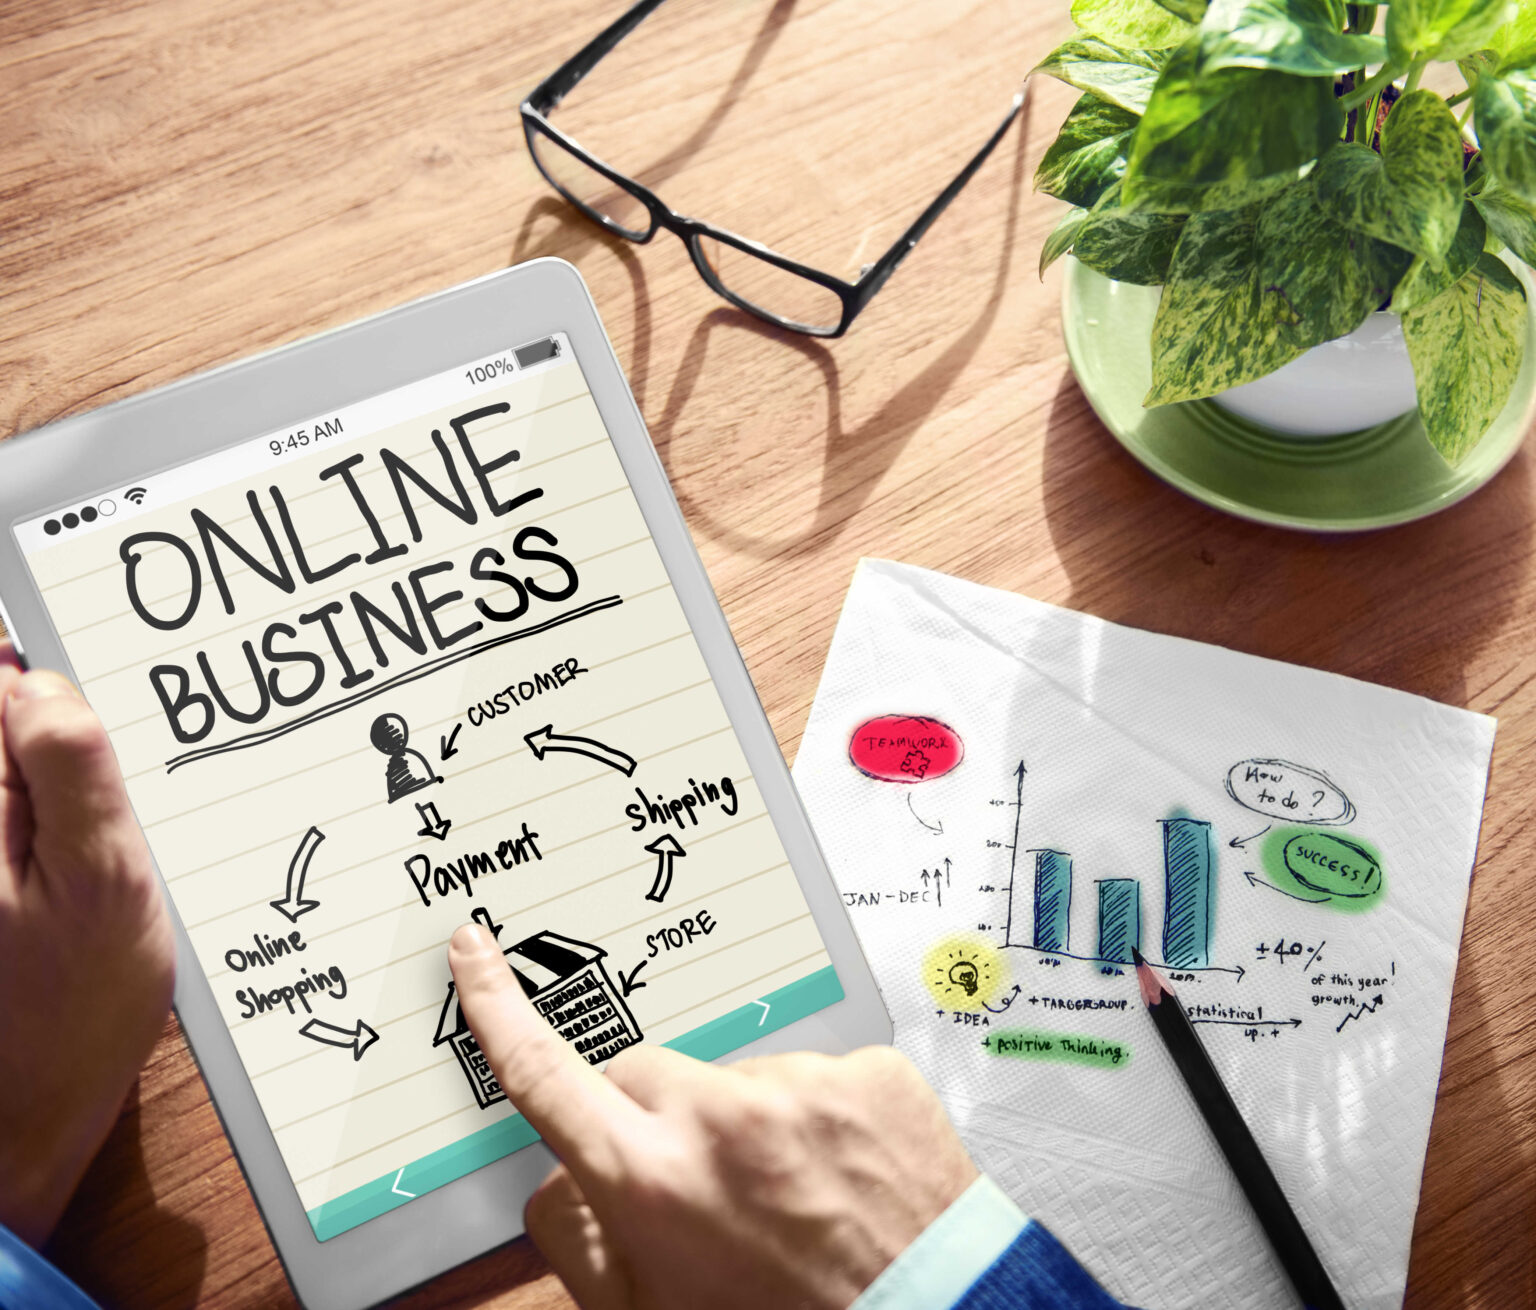 How to Build an Online Business Teledata ICT